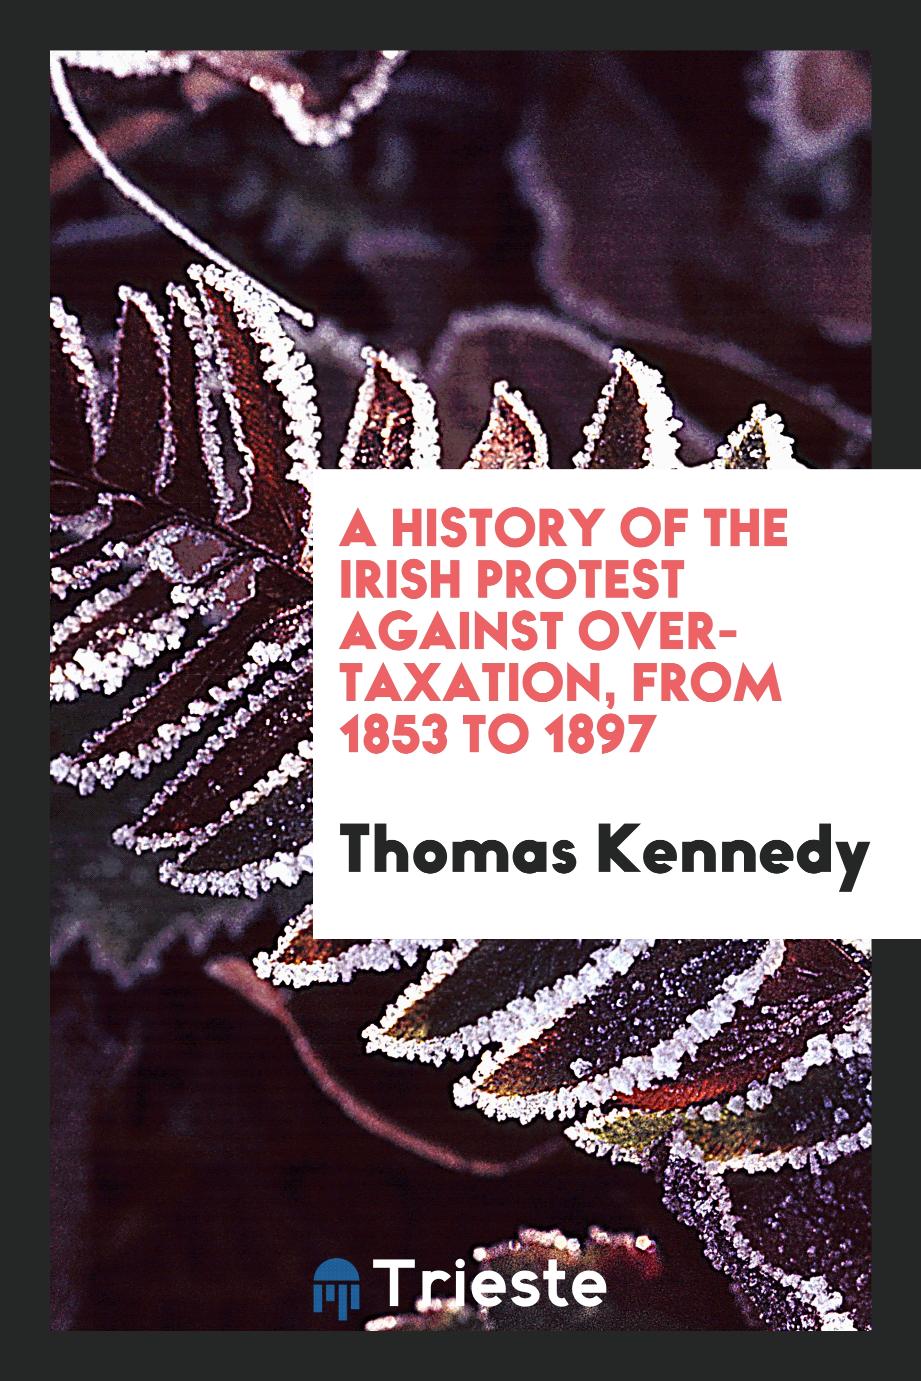 A history of the Irish protest against over-taxation, from 1853 to 1897